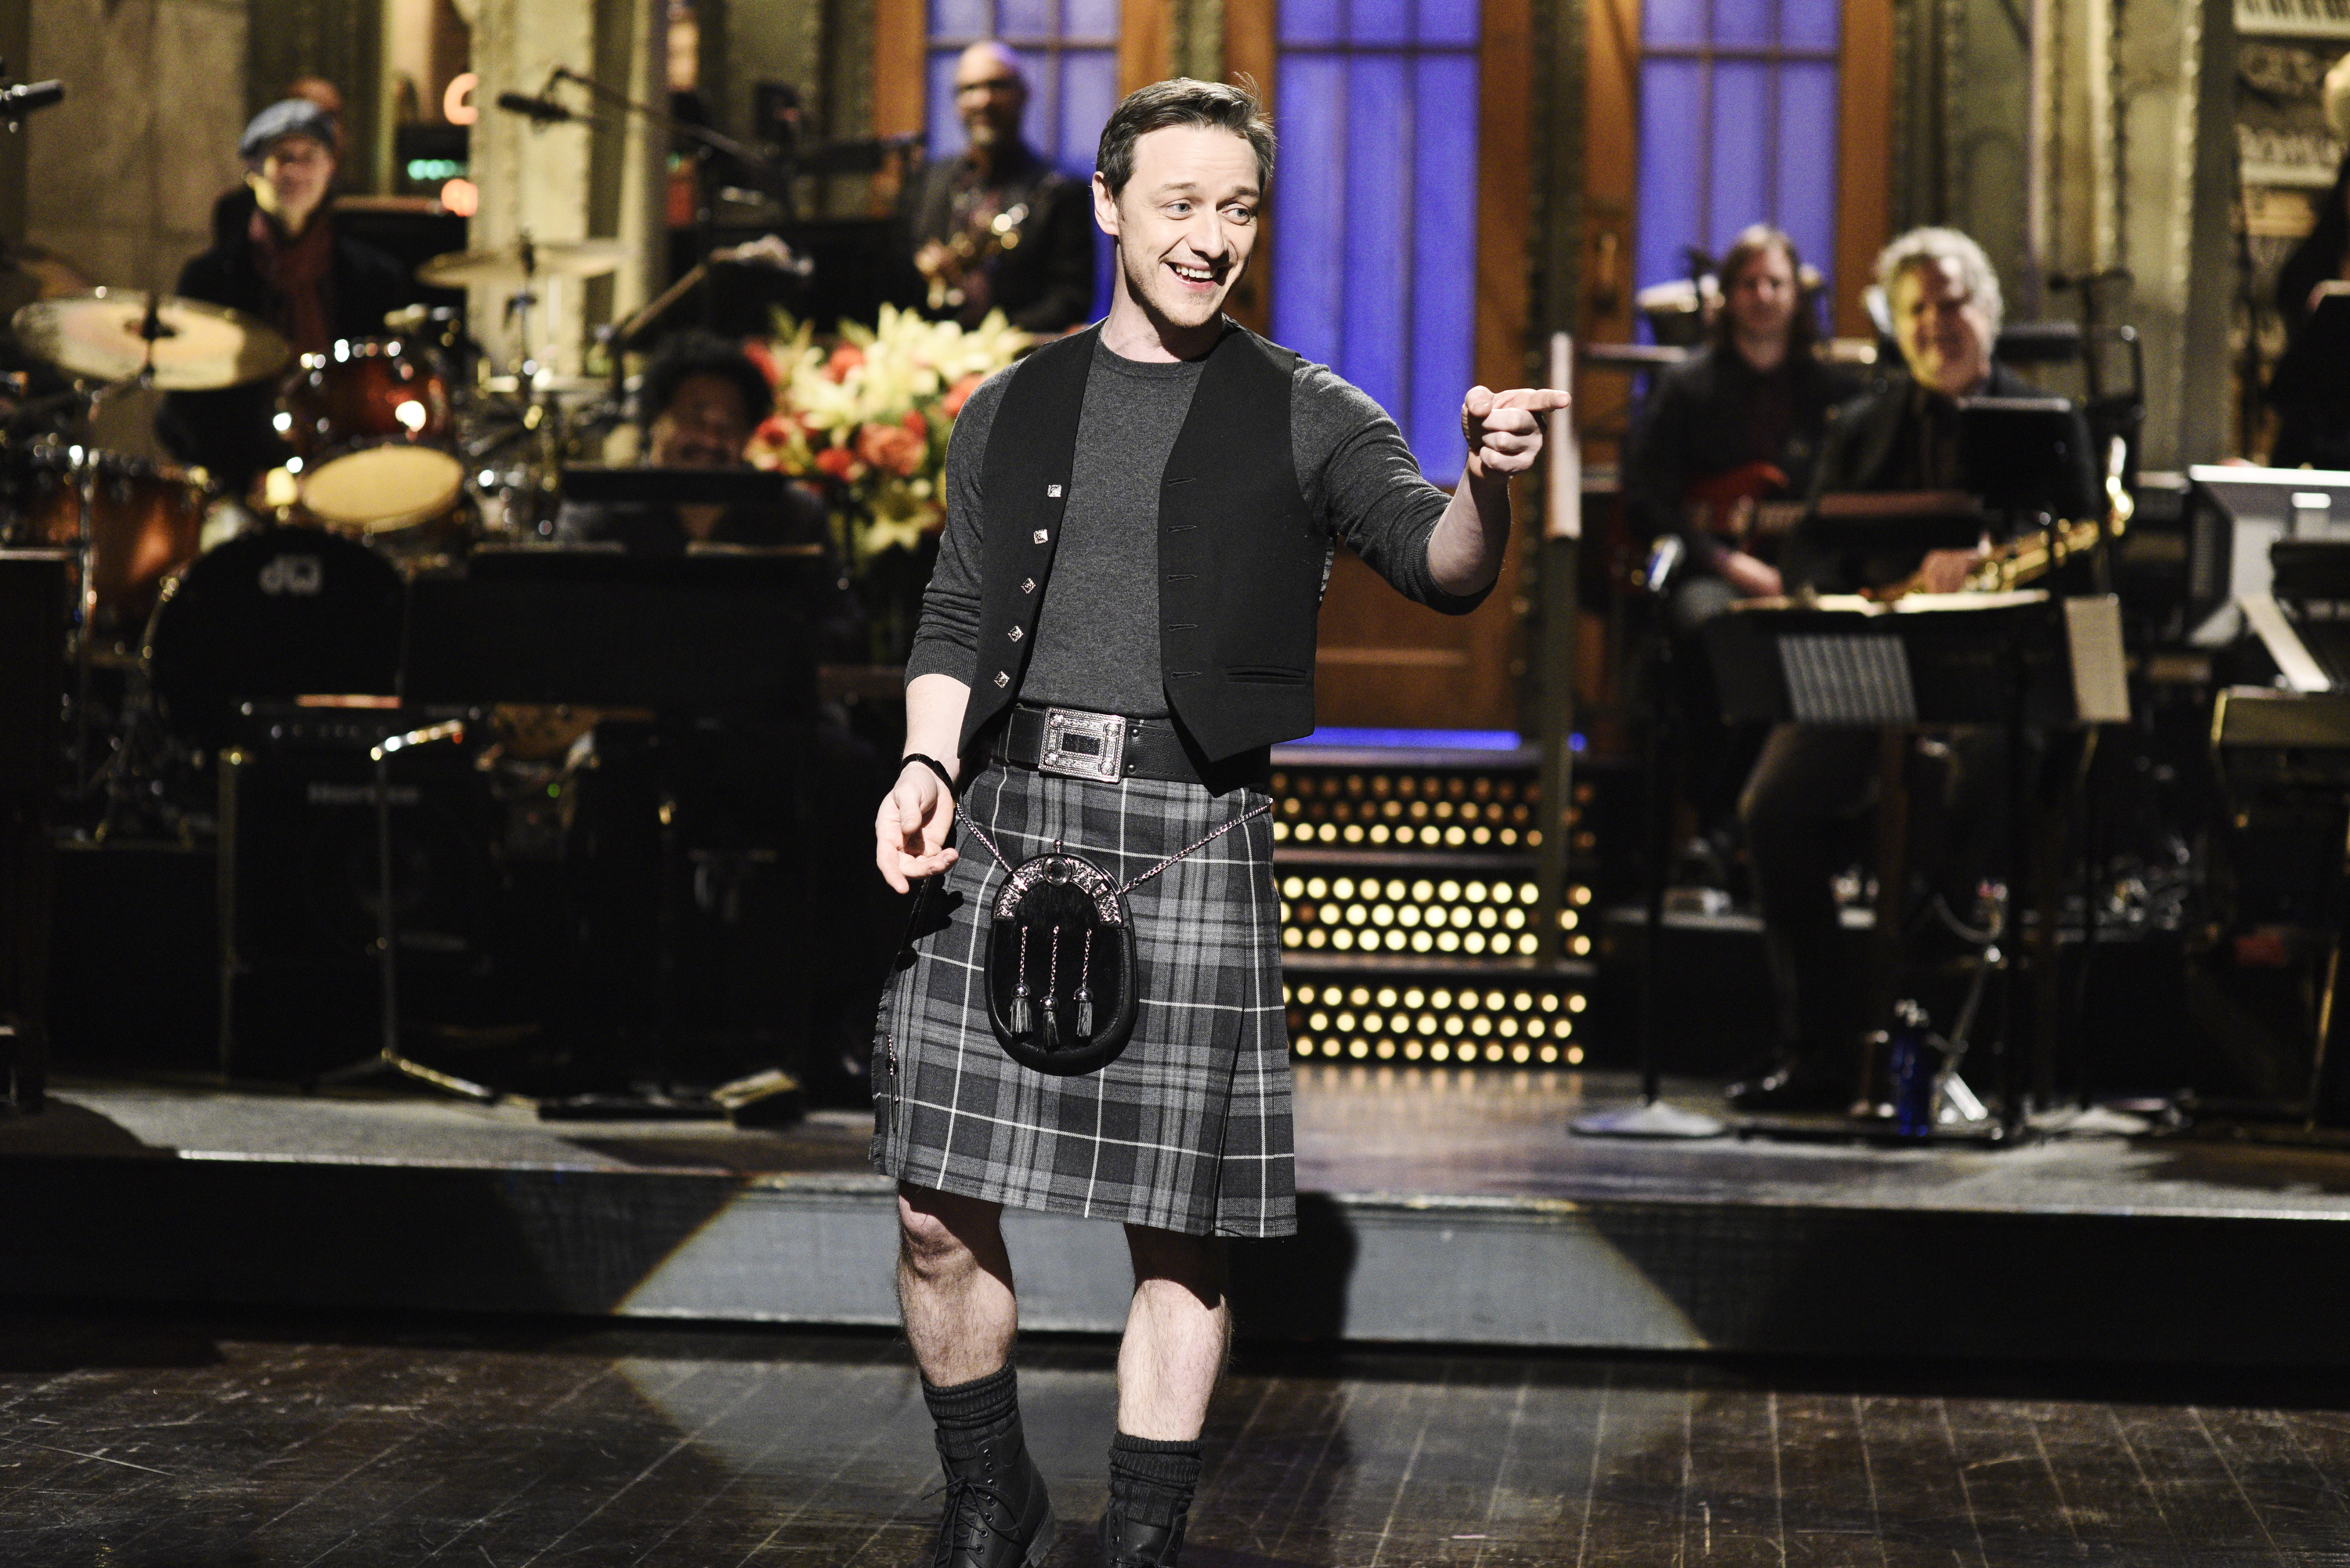 Person in a kilt and vest smiling and gesturing on a stage with a band in the background